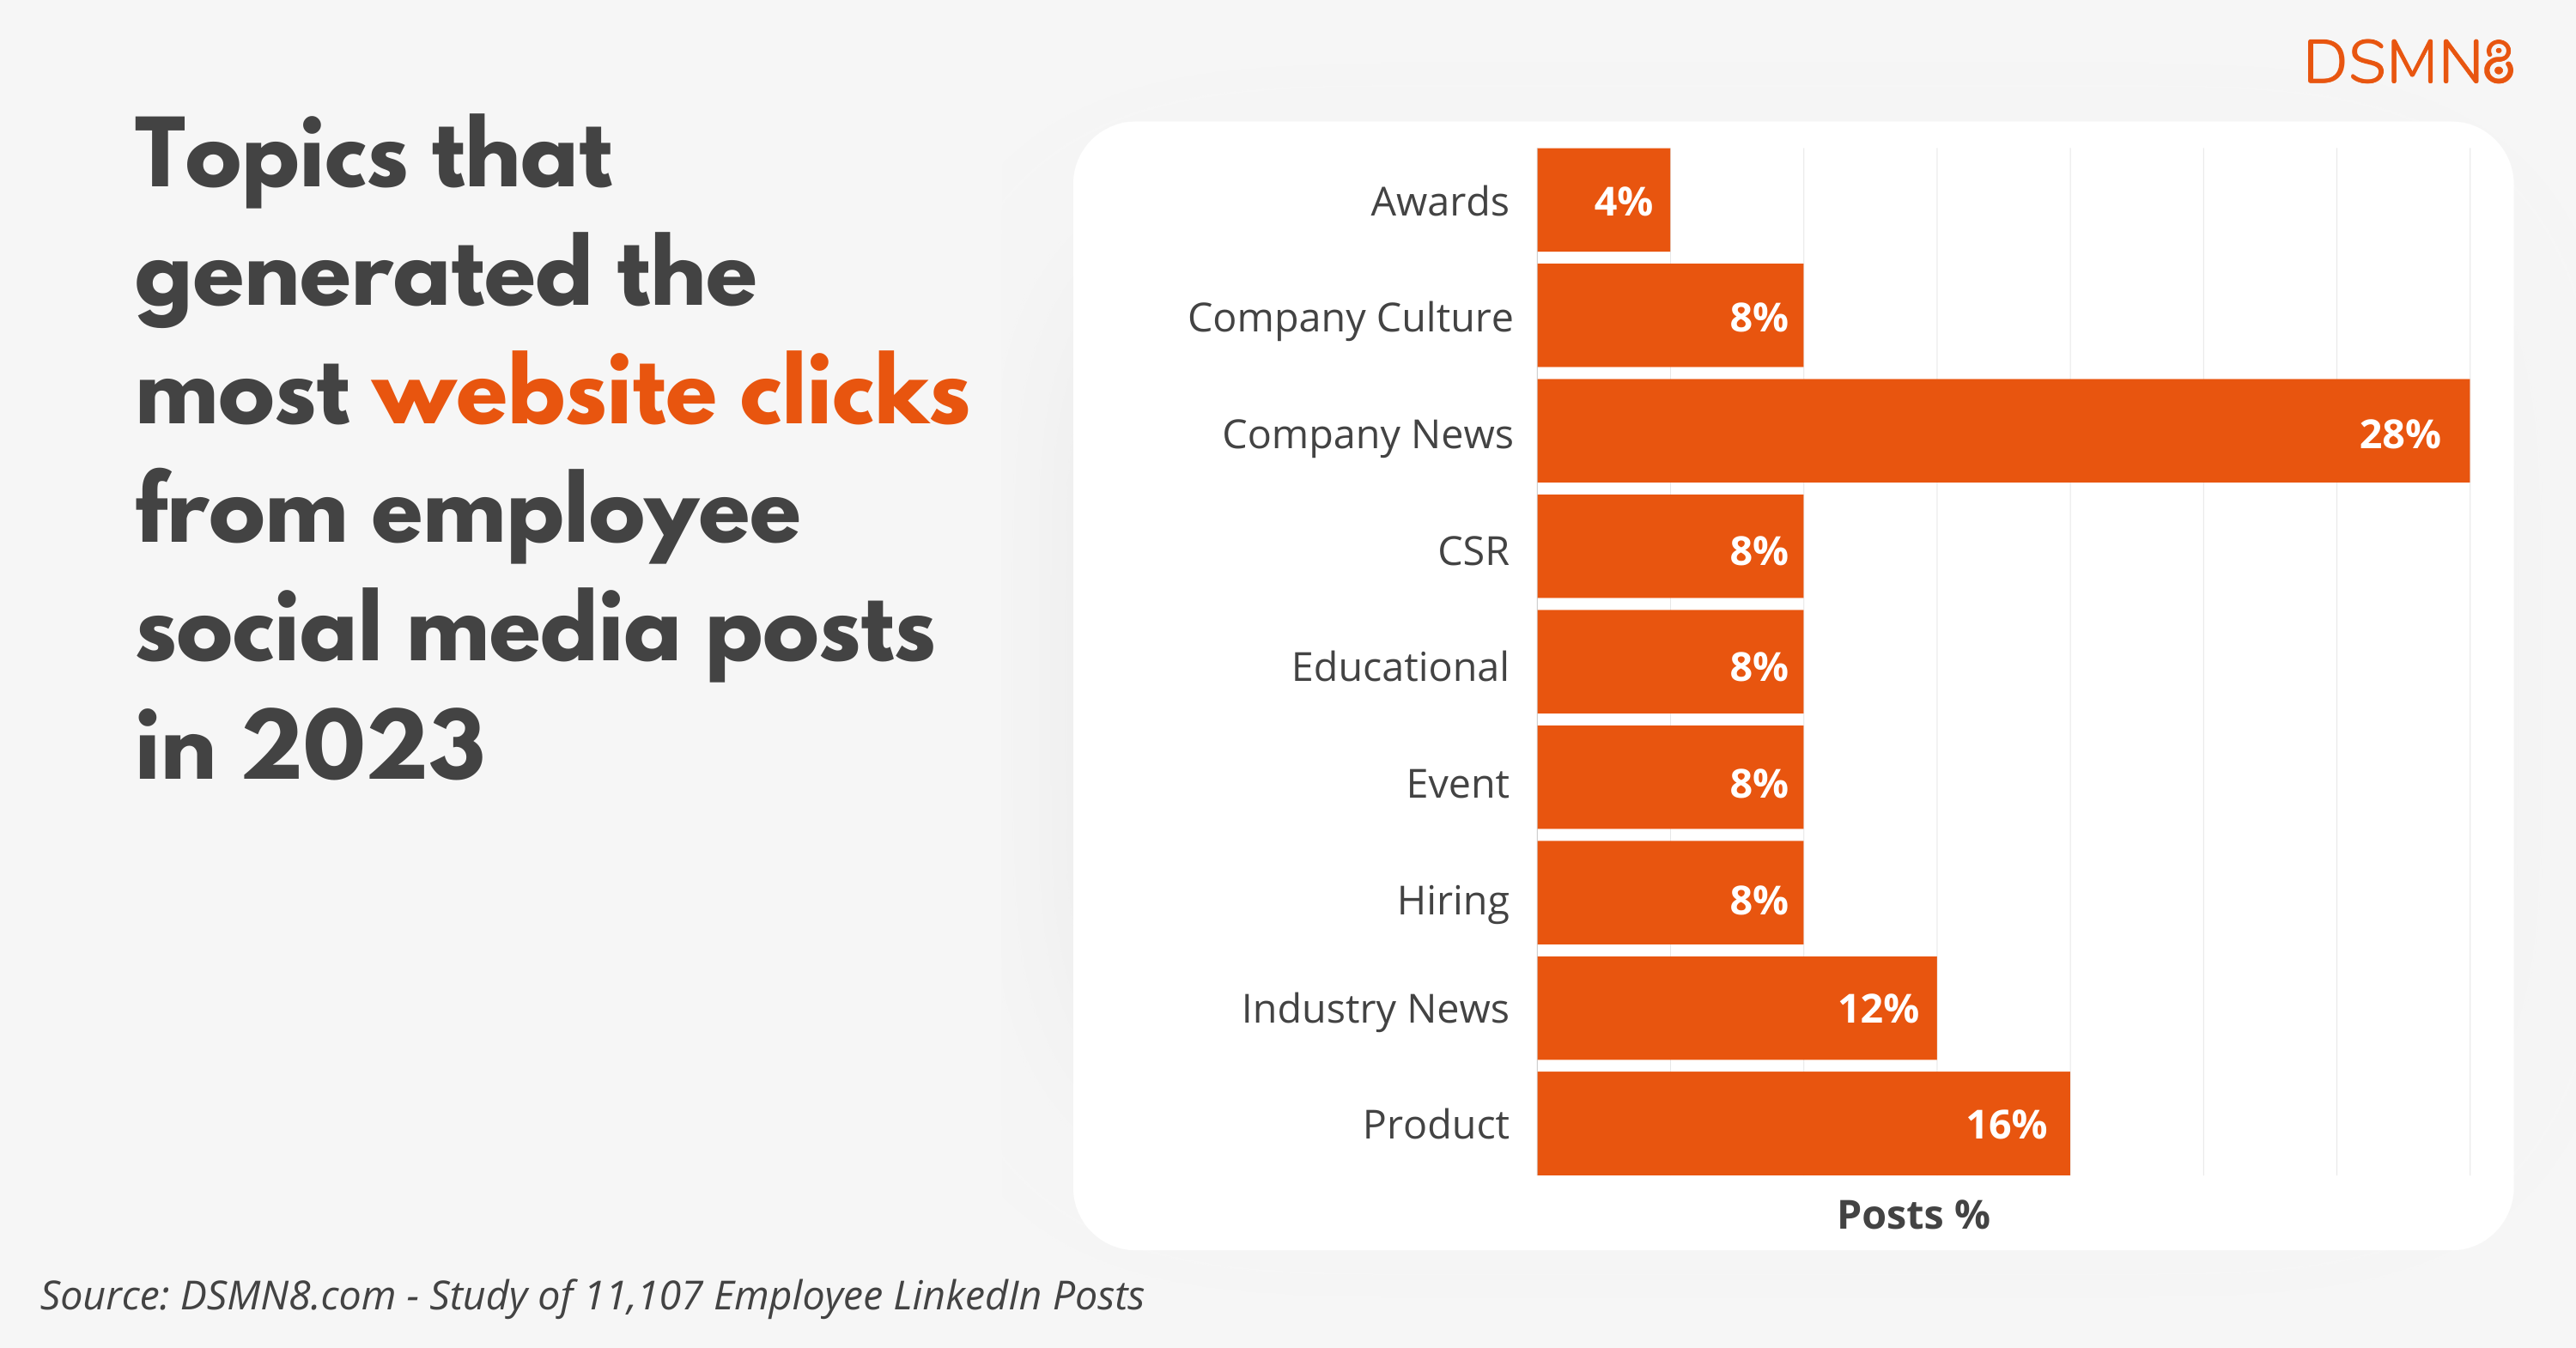 topics that generated the most website clicks from employee social media posts in 2023